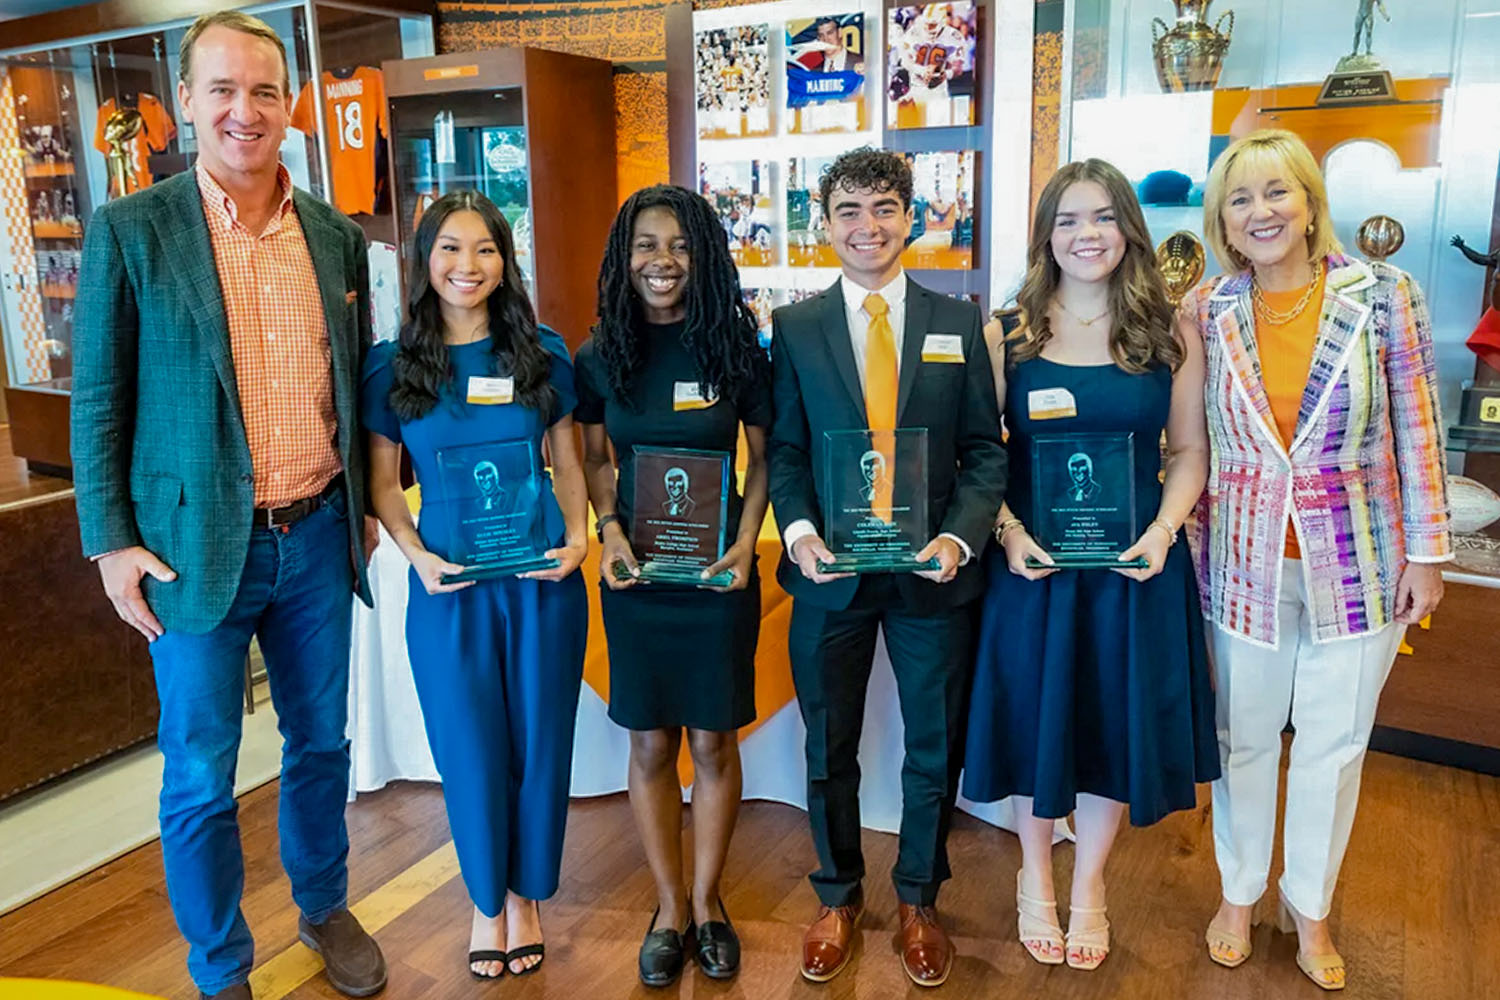 Peyton Manning and Chancellor Donde Plowman recognize the newest Peyton Manning Scholars. Pictured from left to right are Ellie Housley, Ariel Thompson, Coleman Bain and Ava Foley.